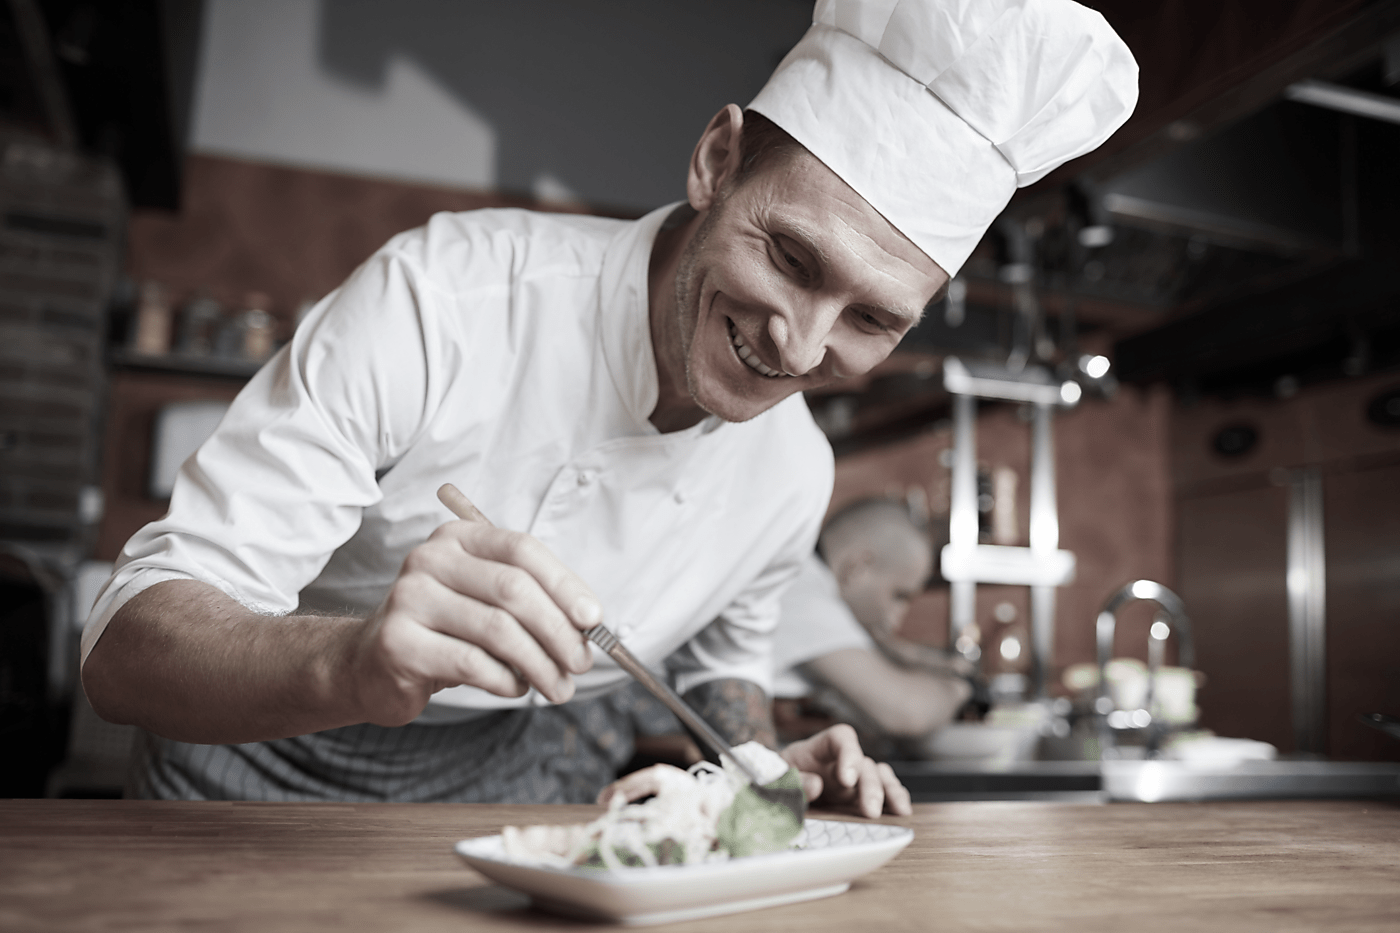 Globalization - Society and Culture - Smiling Chef